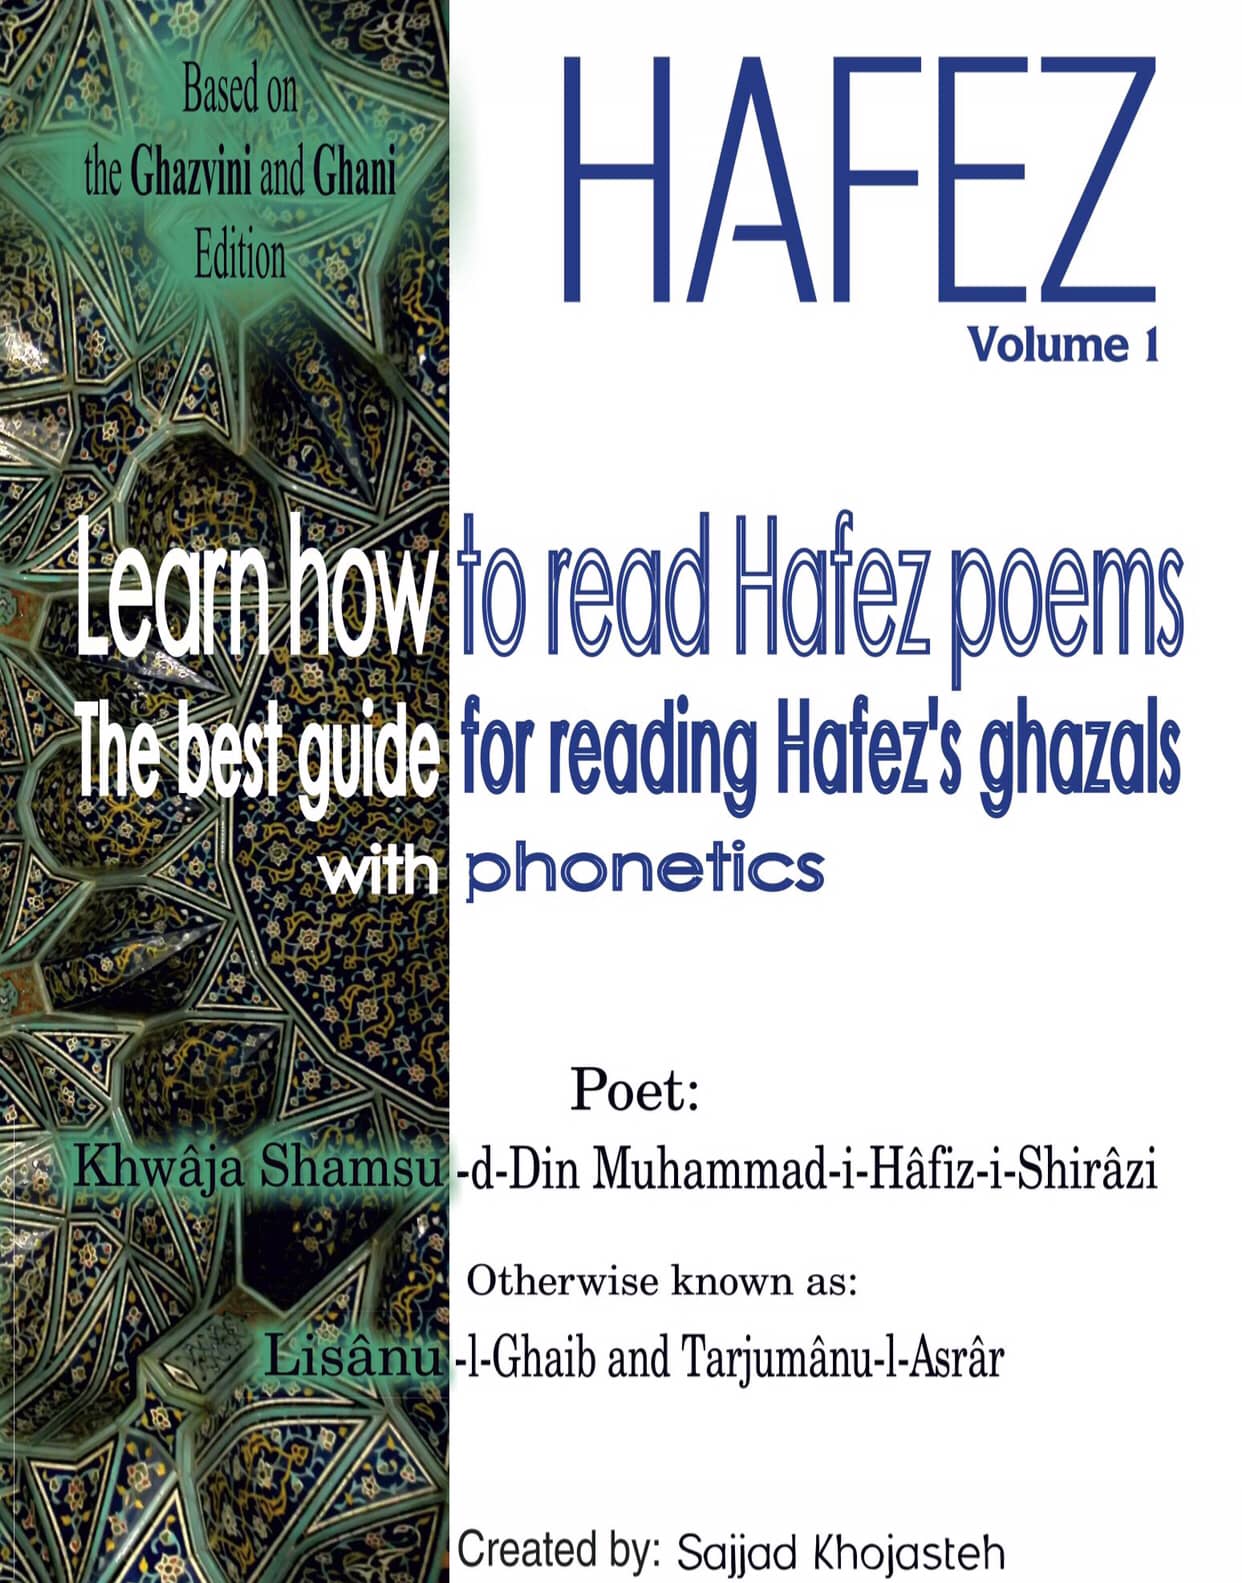 Learn How to Read Hafez Poems: The Best Guide for Reading Hafez's Ghazals with Phonetic transcription by Sajjad Khojasteh